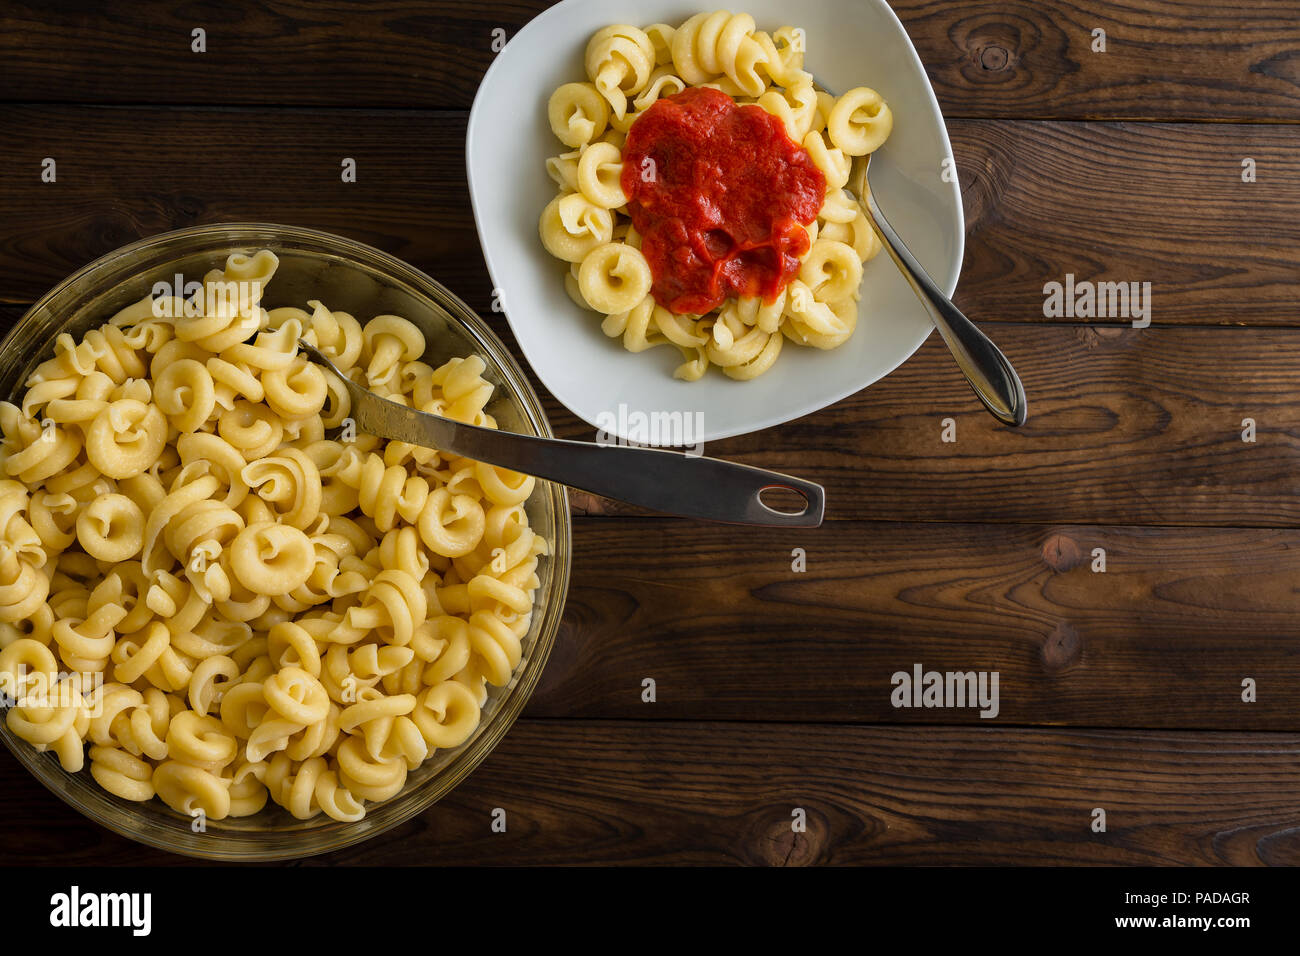 White square plate of pasta with tomato sauce next to clear glass dish of plain pasta over wood plank background. Includes copy space. Stock Photo